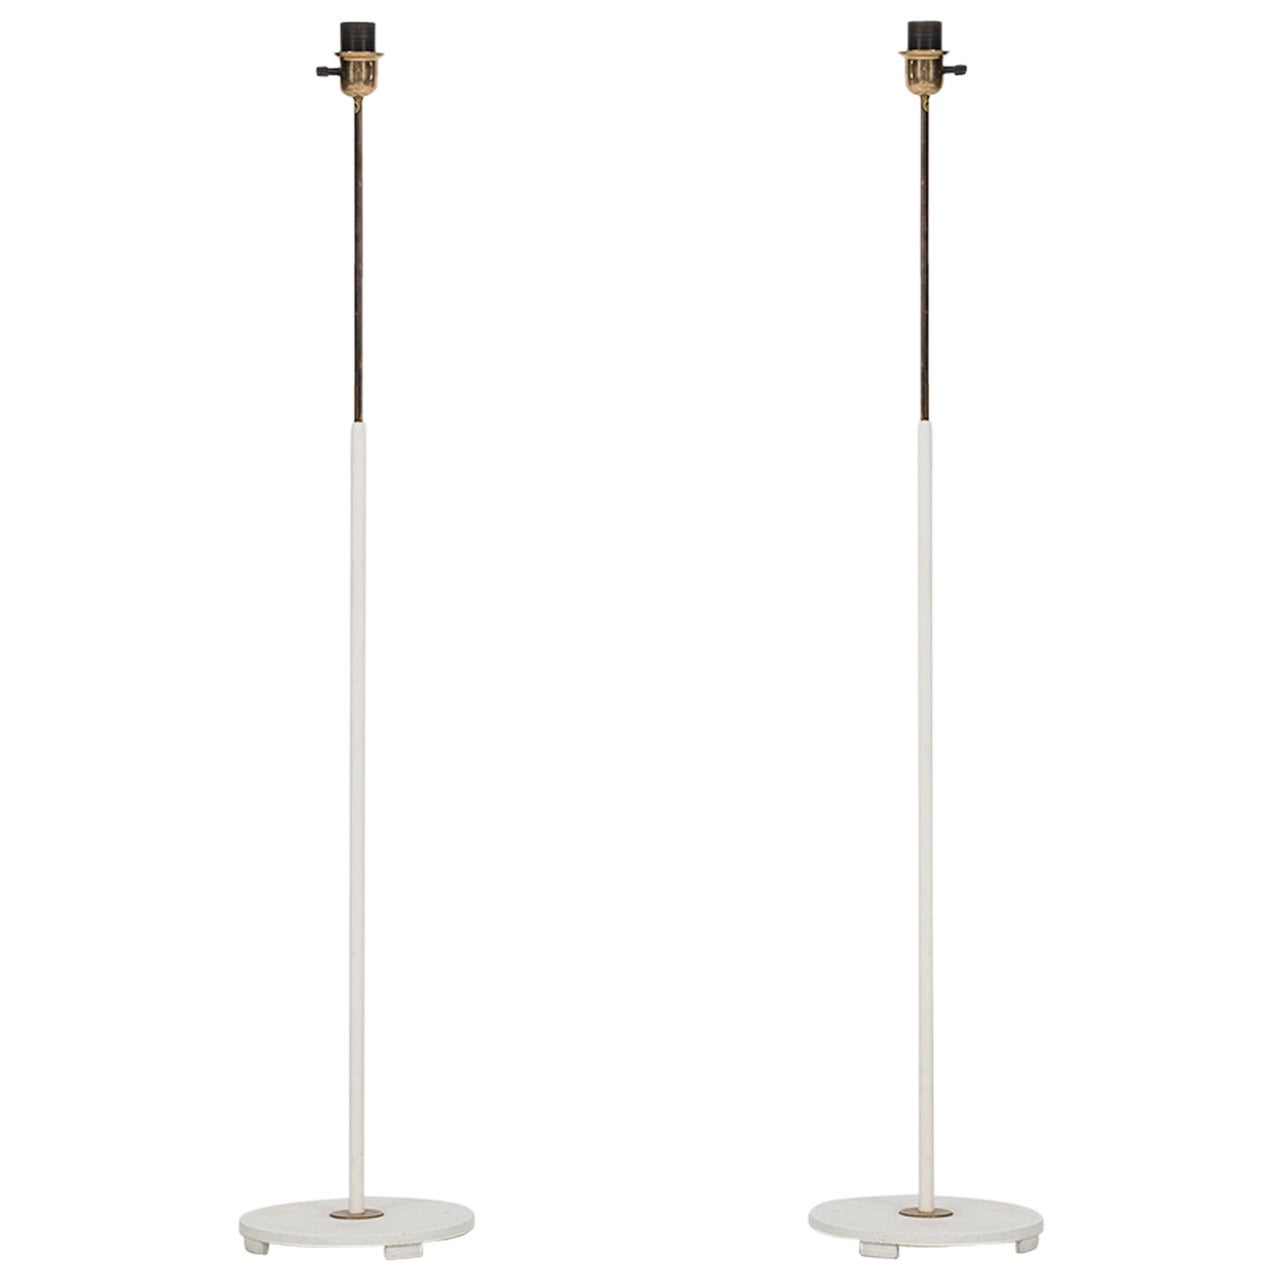 A pair of white floor lamps by ASEA in Sweden